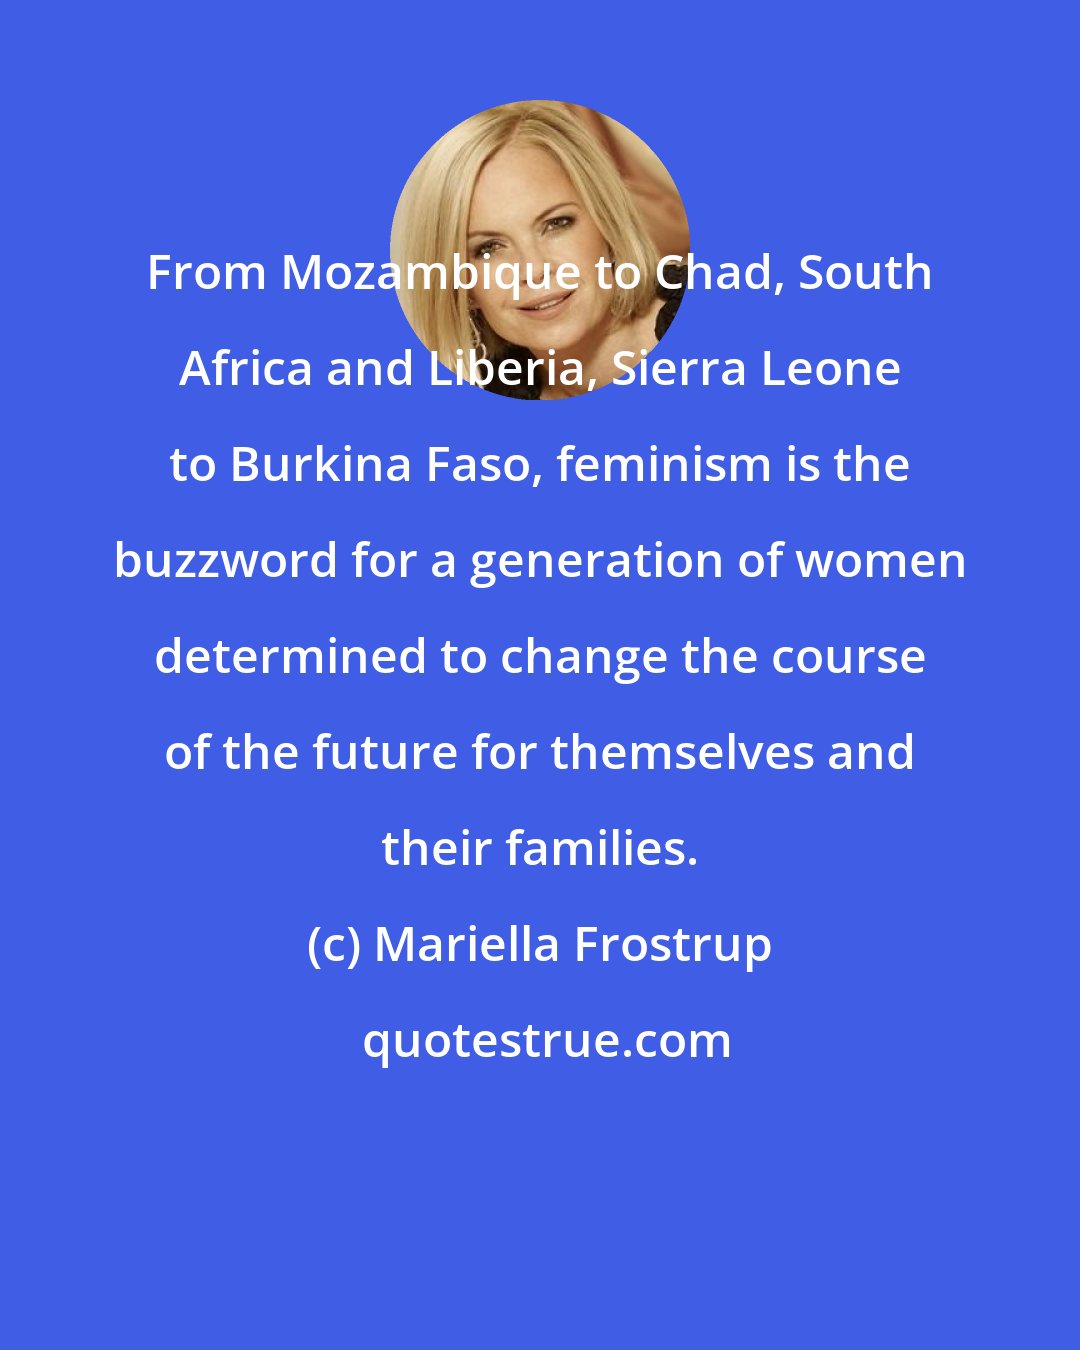 Mariella Frostrup: From Mozambique to Chad, South Africa and Liberia, Sierra Leone to Burkina Faso, feminism is the buzzword for a generation of women determined to change the course of the future for themselves and their families.